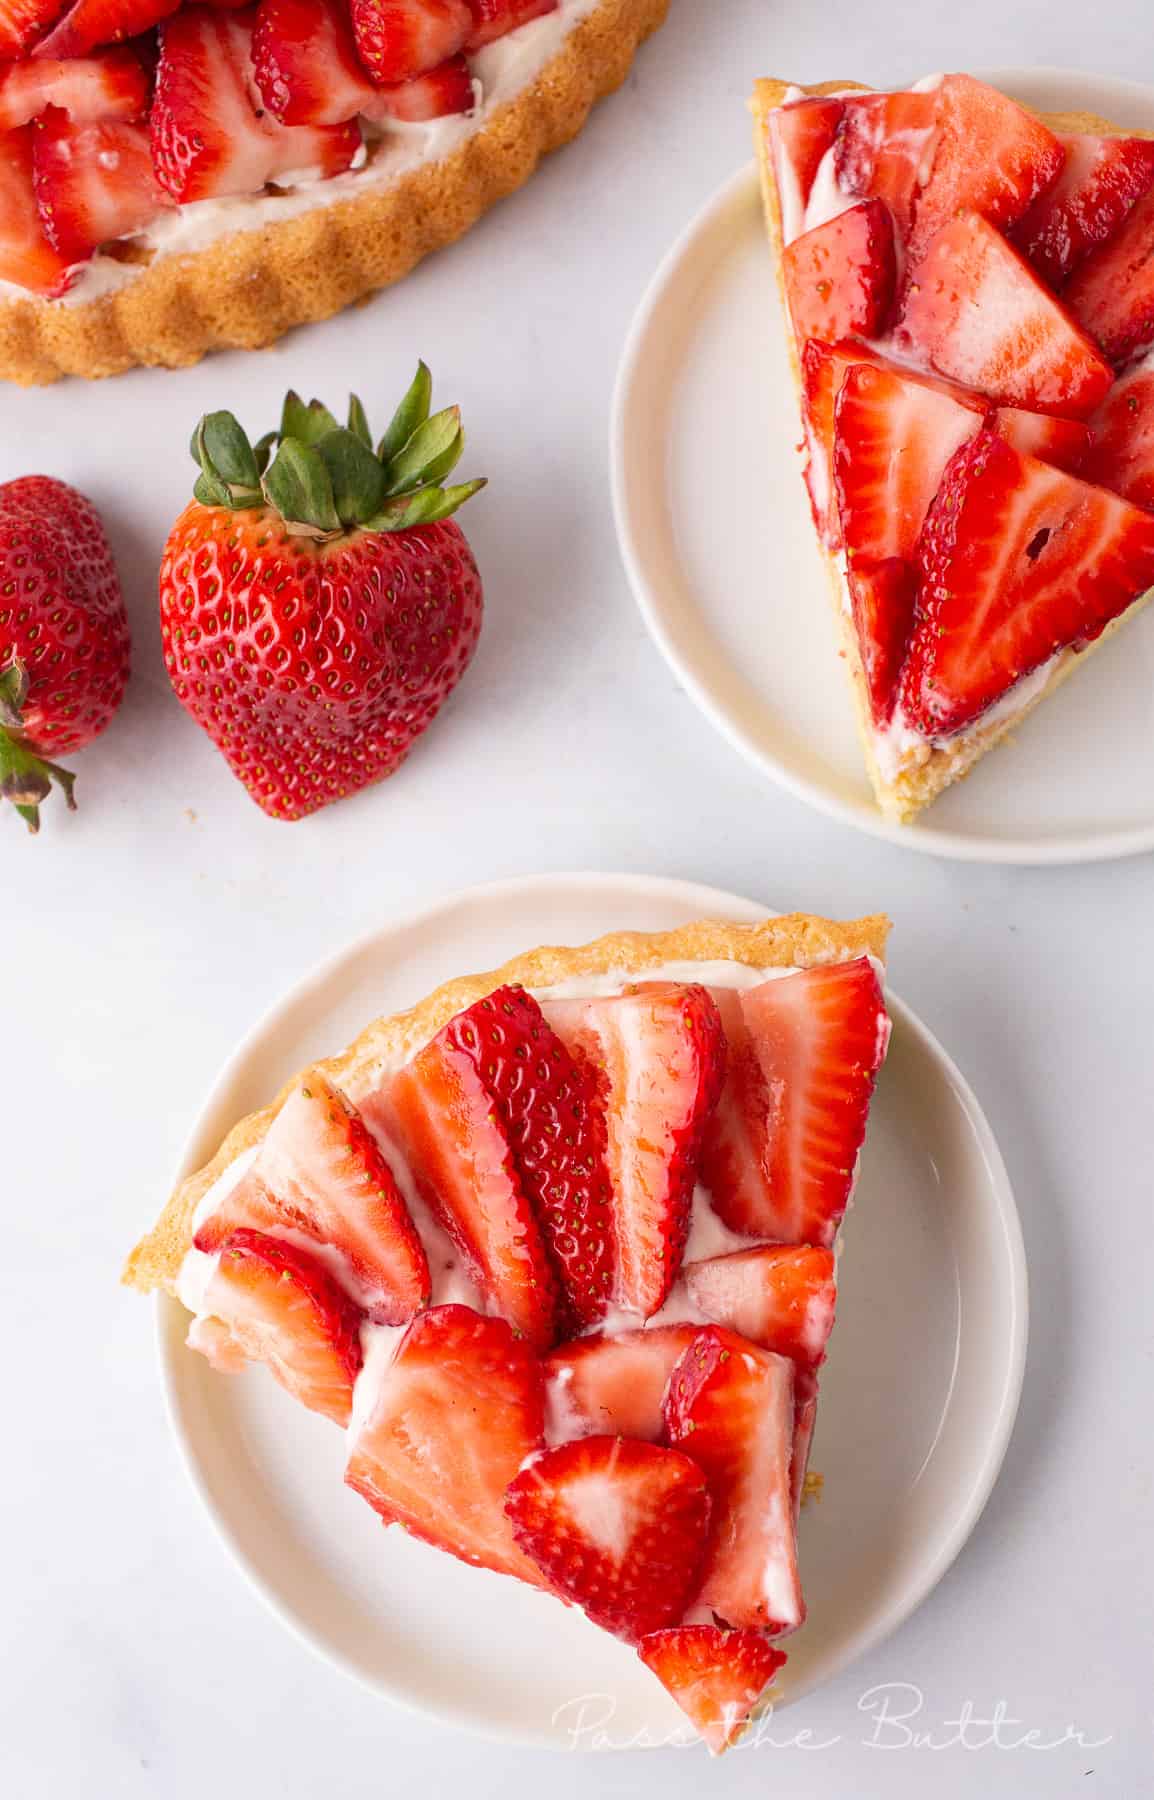 A slice of strawberry flan on a plate with fresh strawberries.